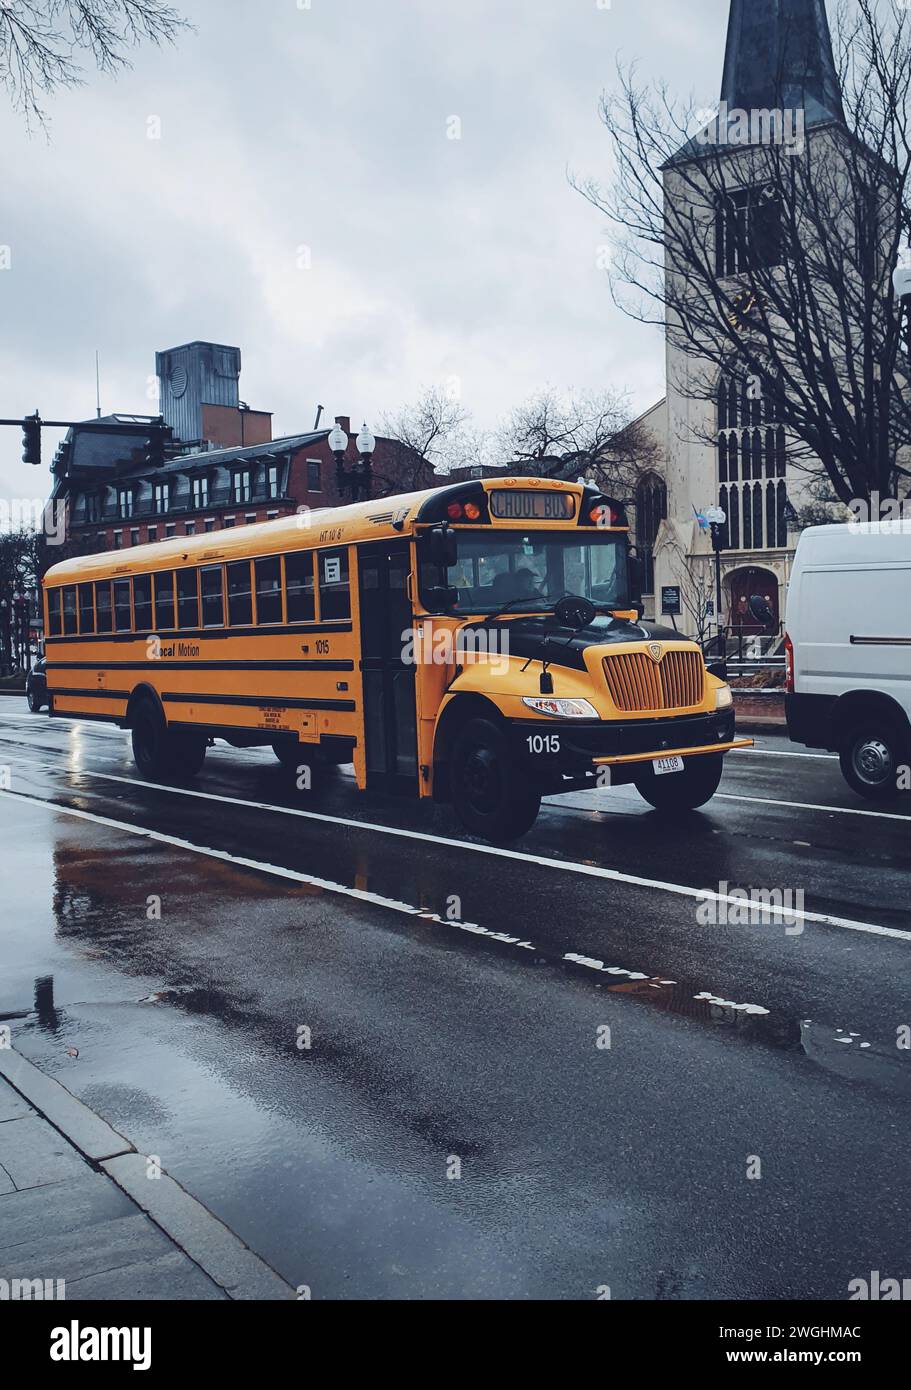 Typical school bus in Boston, United States, on February 13, 2020 Stock Photo